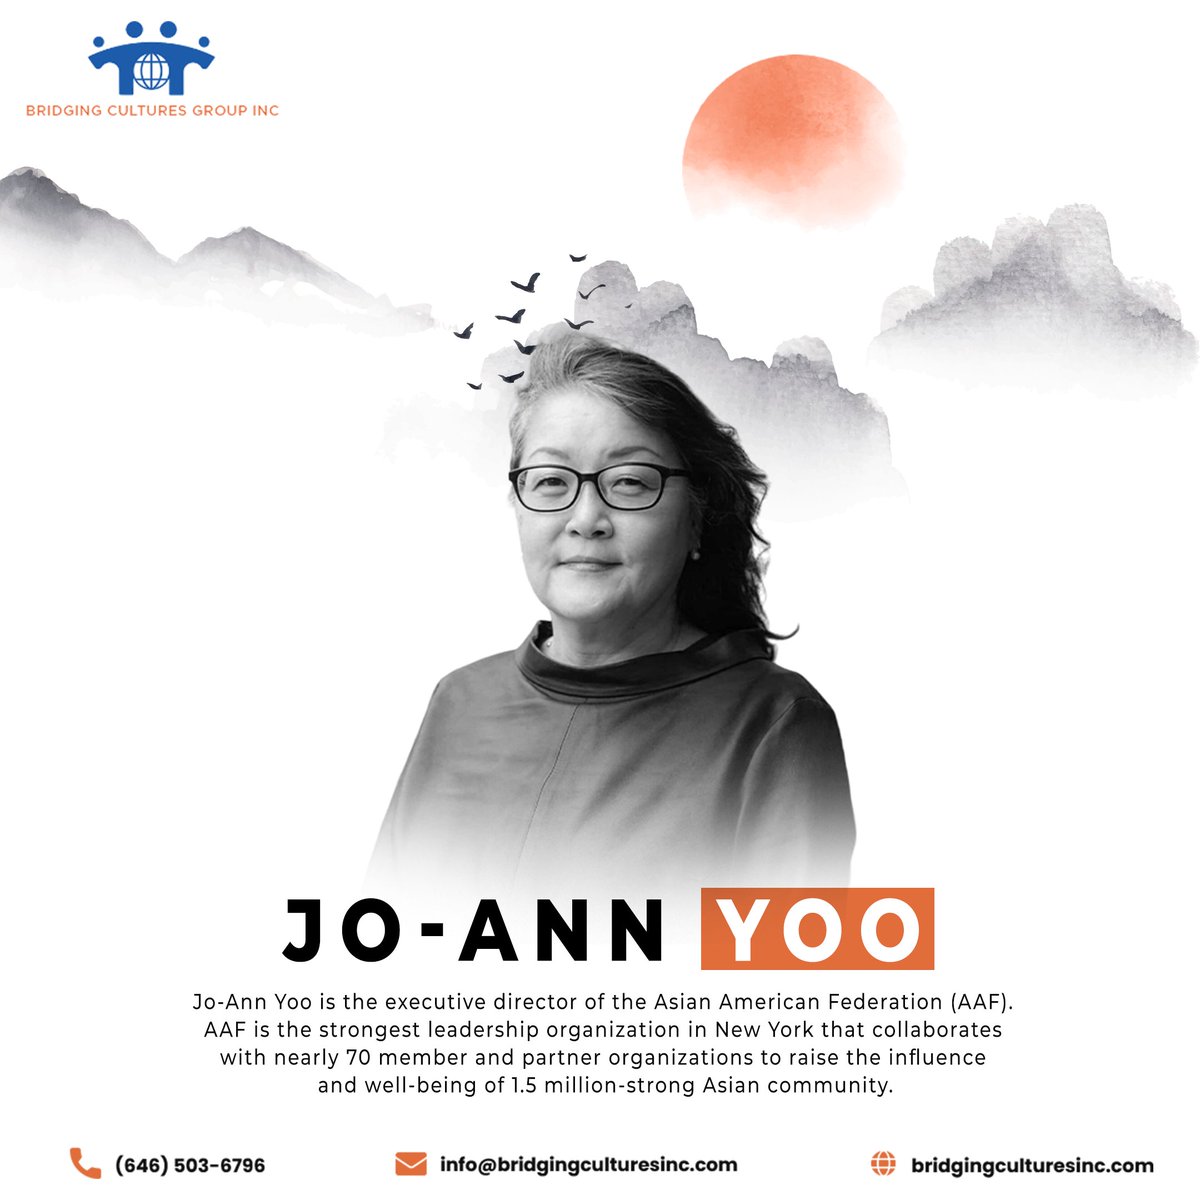 During #AAPIHeritageMonth, we honor Jo-ann Yoo, Executive Director of the @AAFederation. Her leadership in promoting the welfare and prosperity of Asian Americans in New York is inspiring.

#BCG #DEI #Leadership #CommunityService #AAPI